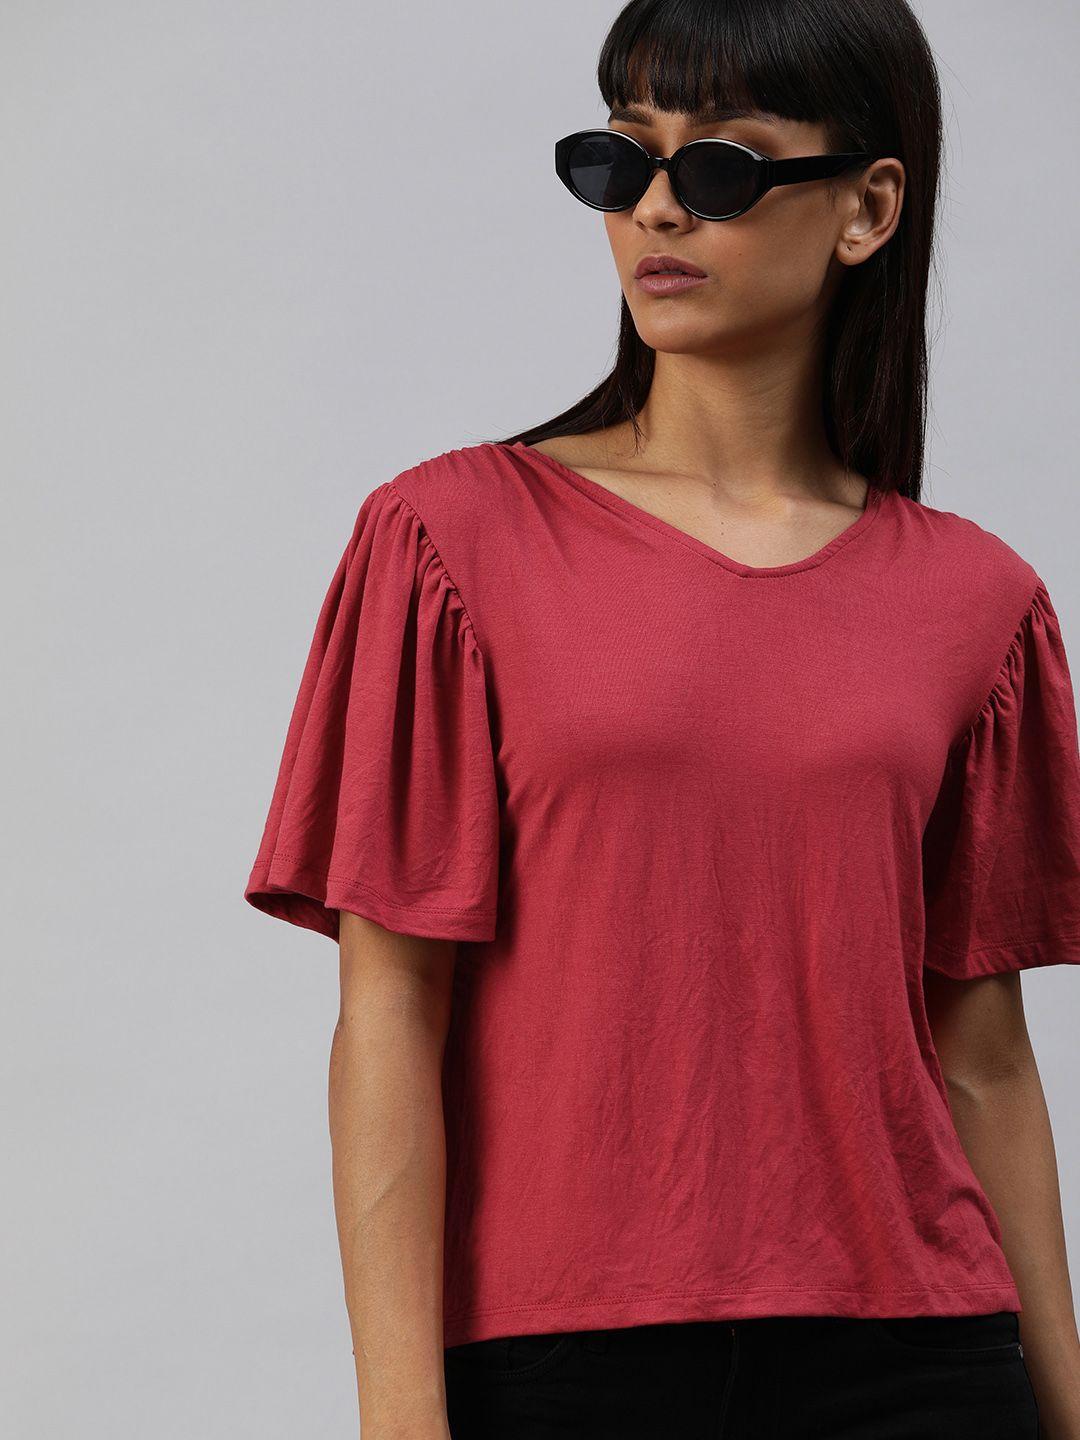 the roadster lifestyle co women maroon solid top with flared sleeves